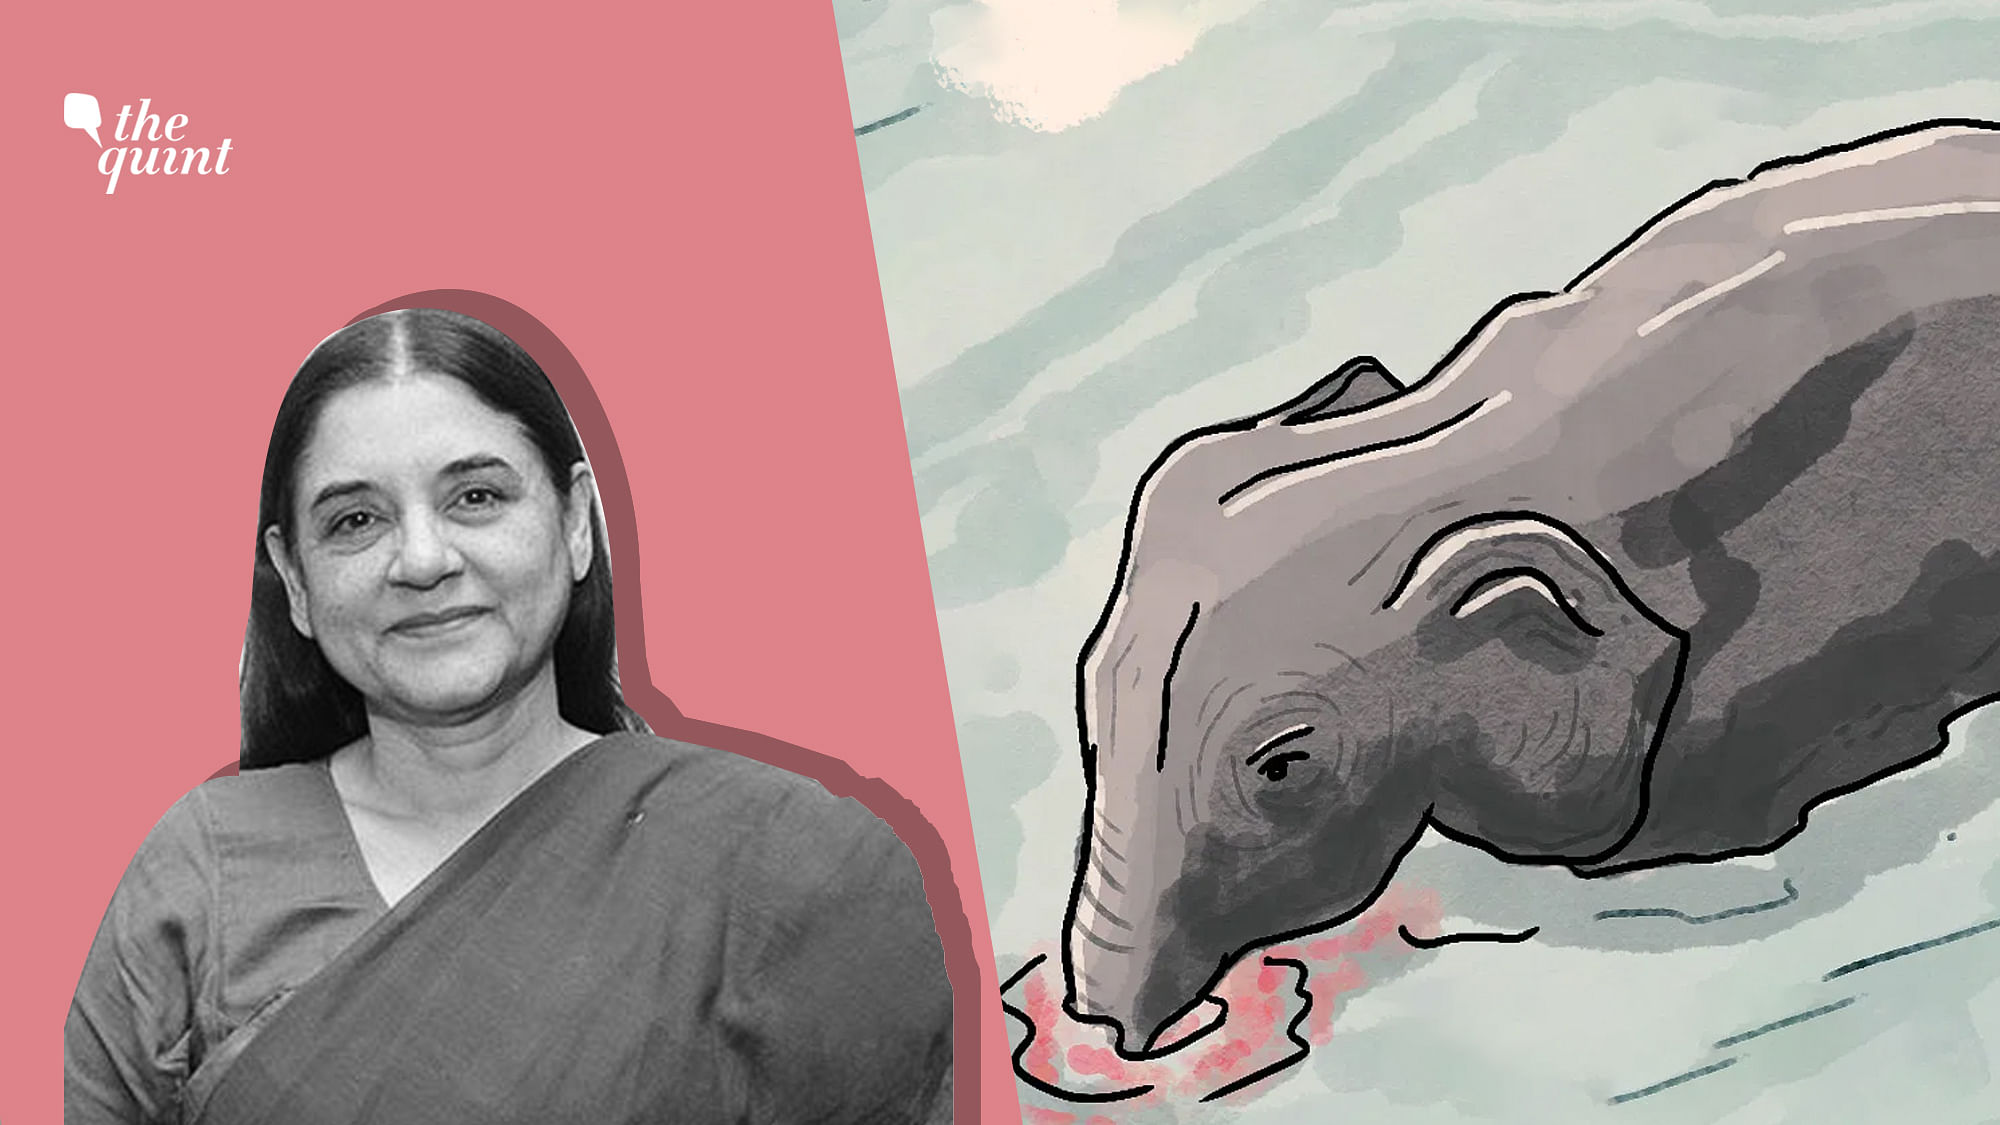 Maneka Gandhi has wrongly blamed Malappuram for the death of a pregnant elephant in Palakkad